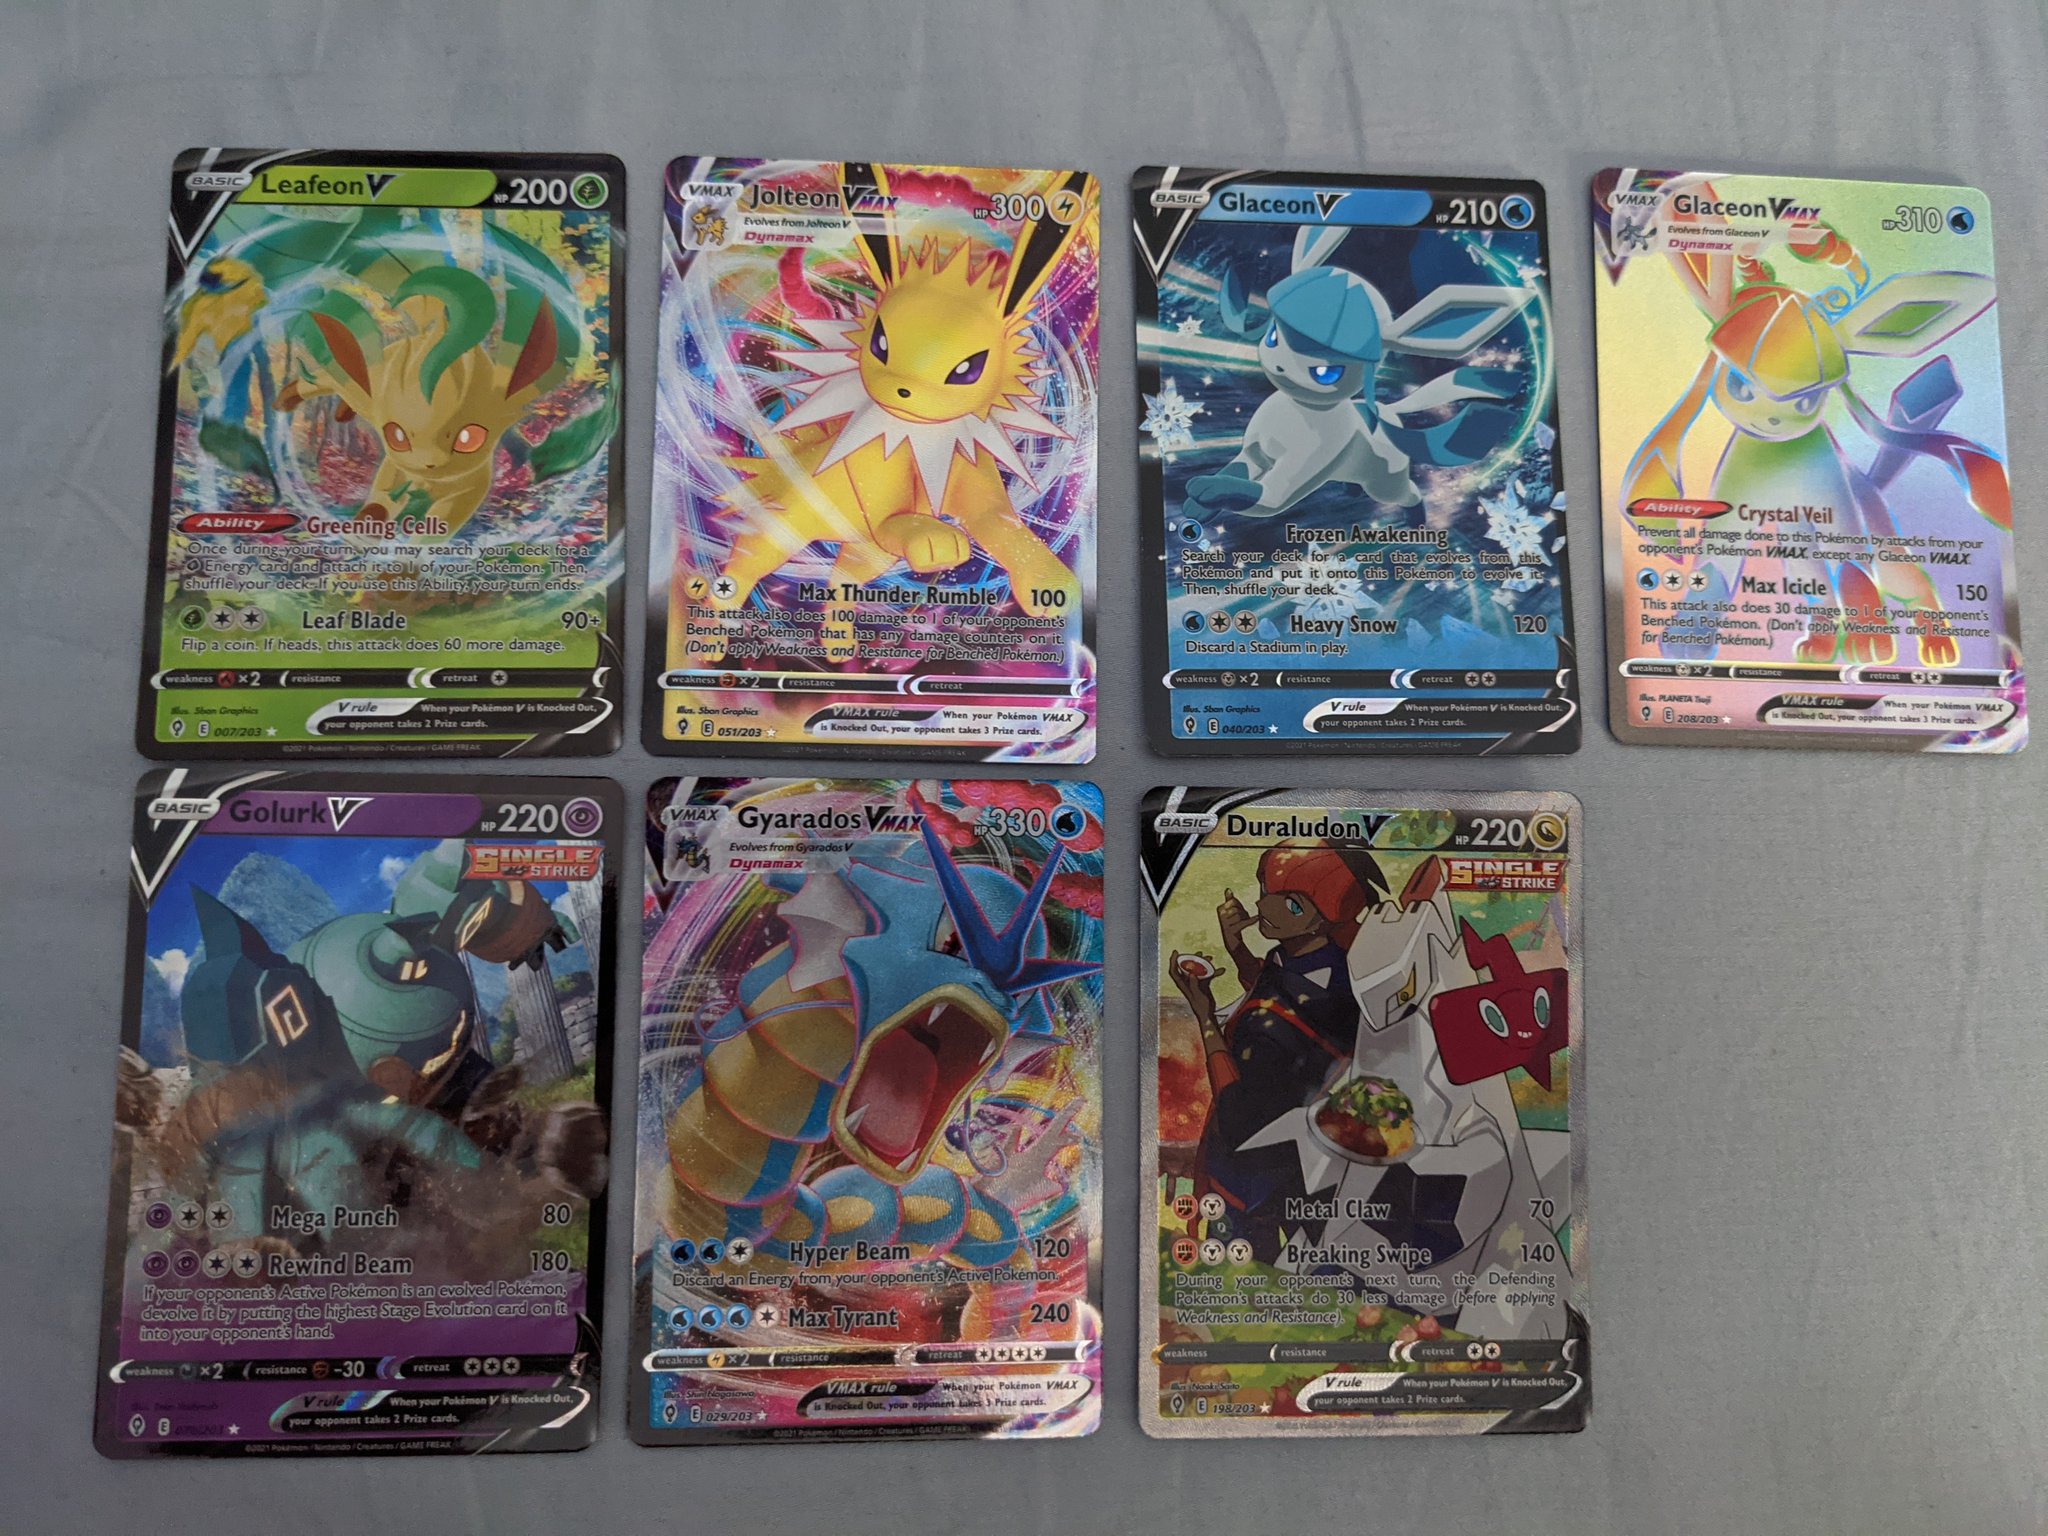 I finally added the Reshiram & Zekrom GX alt art to the collection